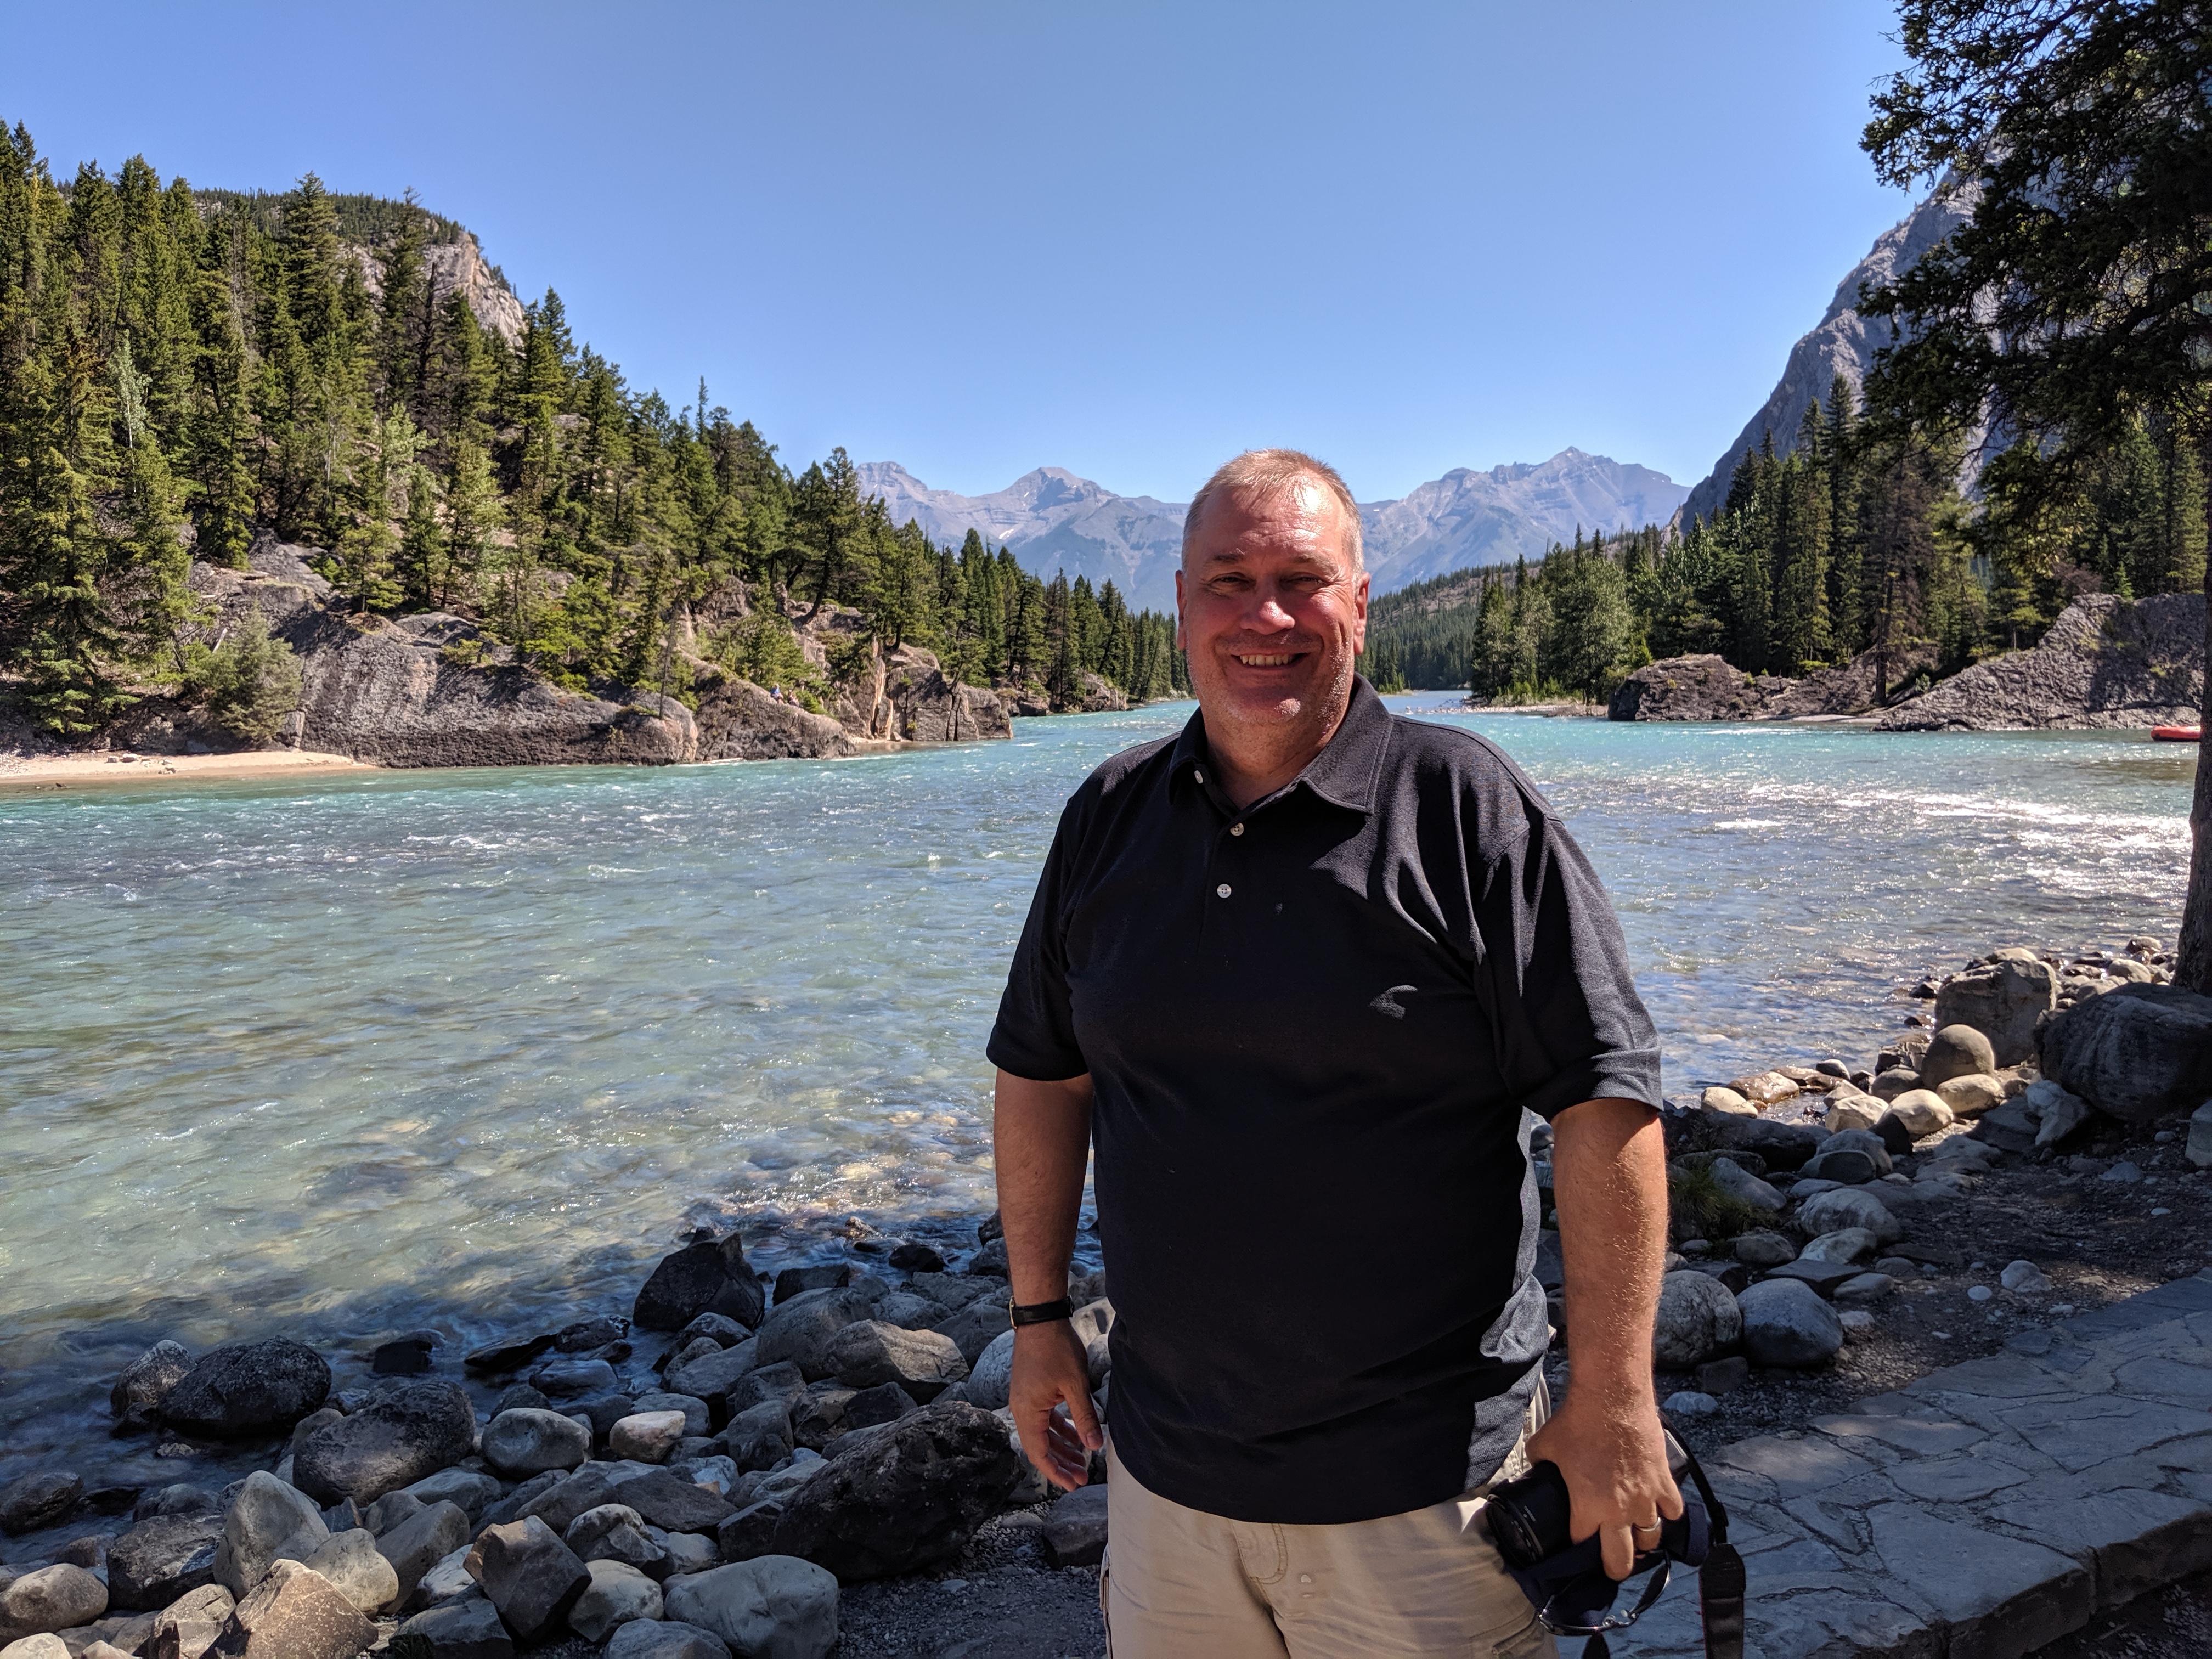 picture of Jeremy Allison in front of a beautiful nature landscape with water, mountains and trees.